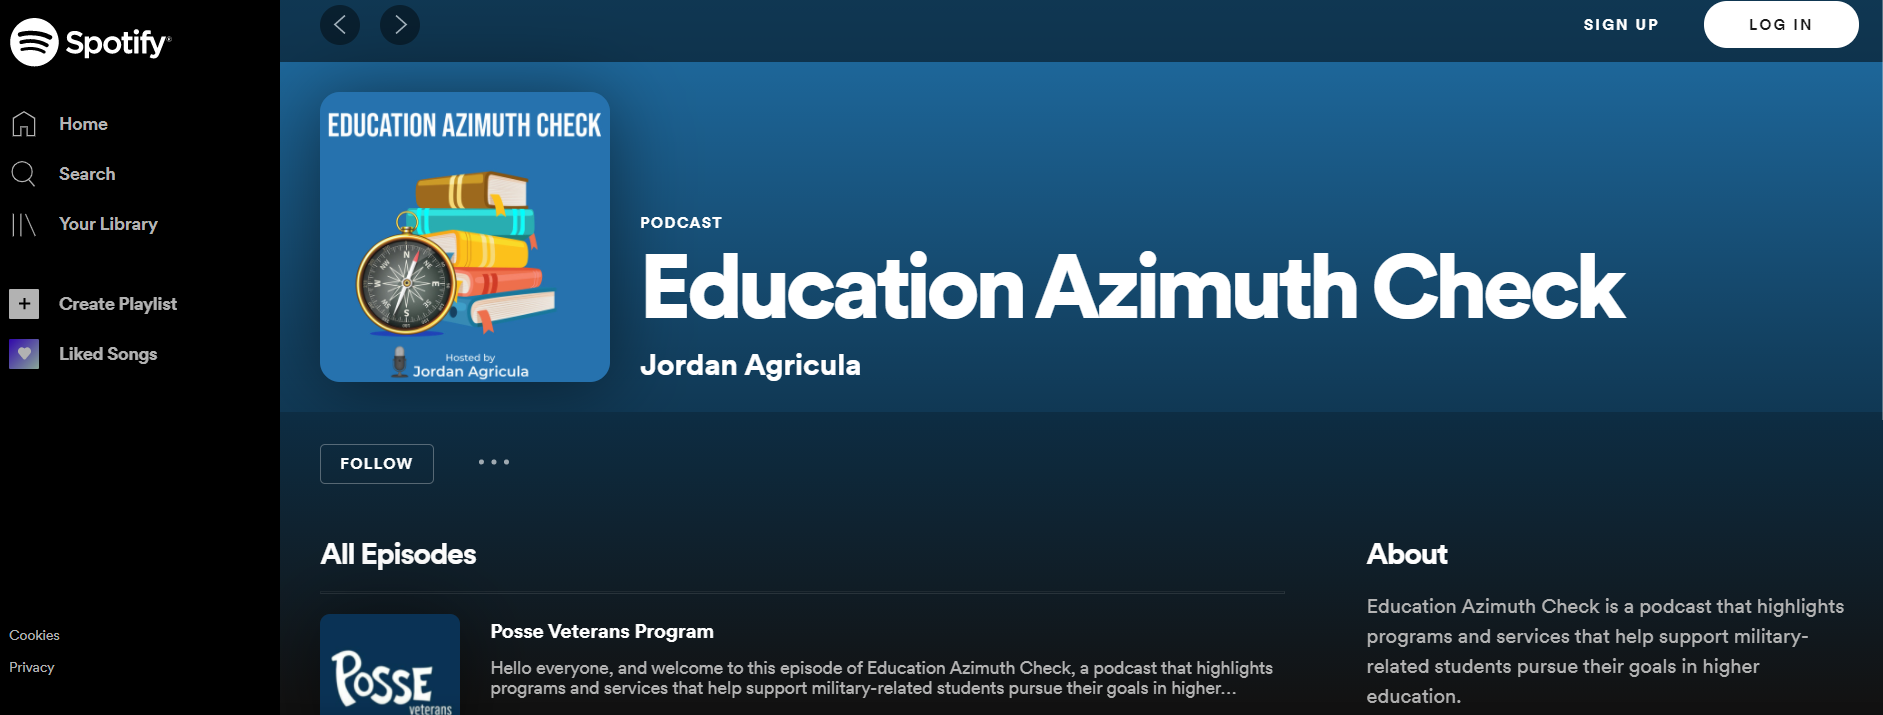 Education Azimuth Check on spotify by Jordan Agricula ’21